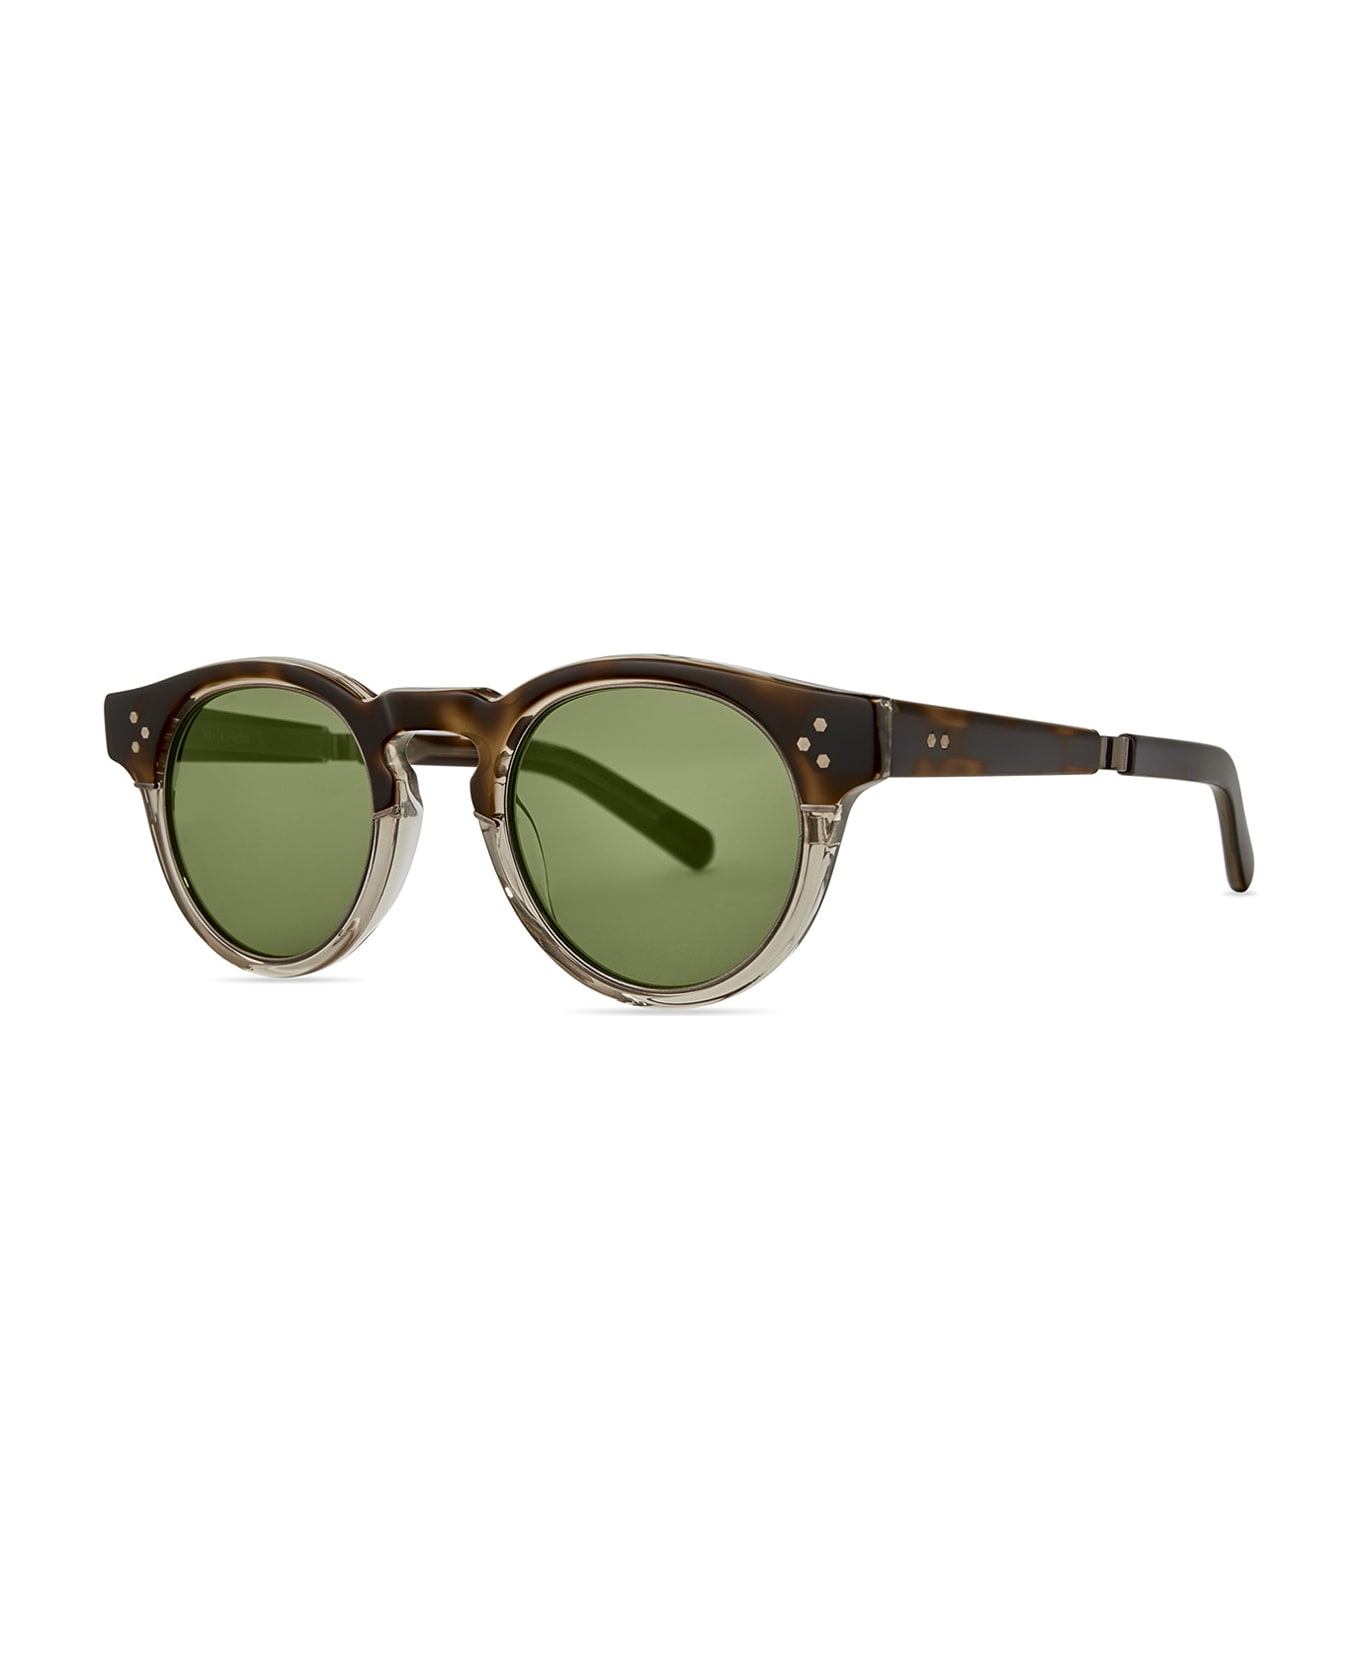 Mr. Leight Kennedy S Honeycomb Laminate-antique Gold/green Sunglasses - Honeycomb Laminate-Antique Gold/Green サングラス